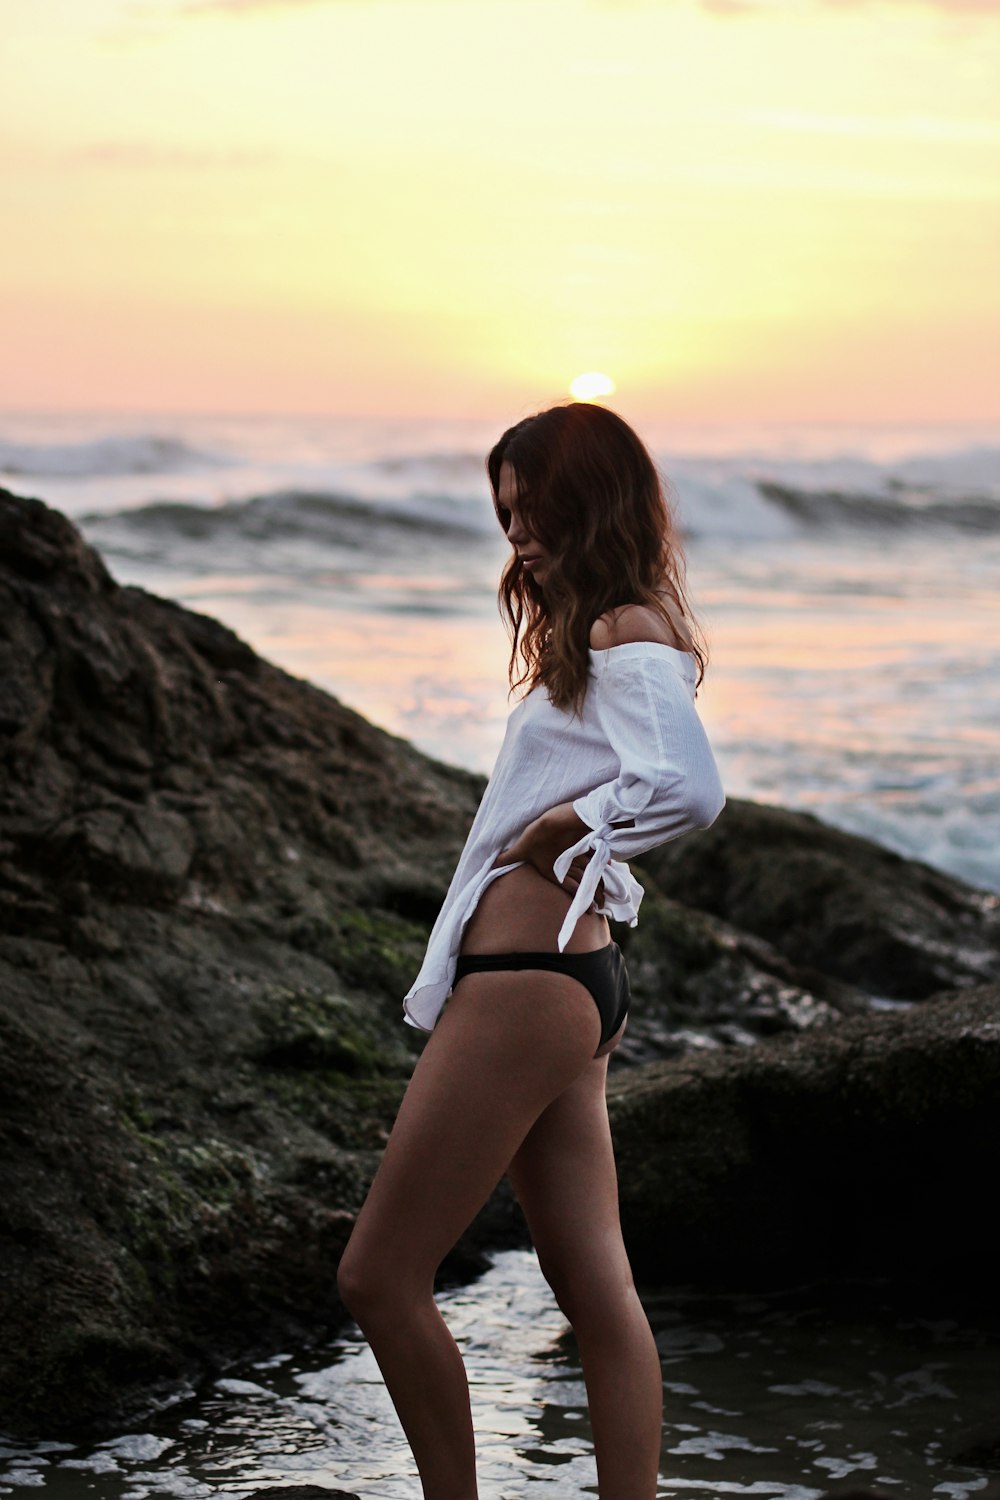 woman wearing white off-shoulder shirt and black panty standing on shore with large rock during golden hour